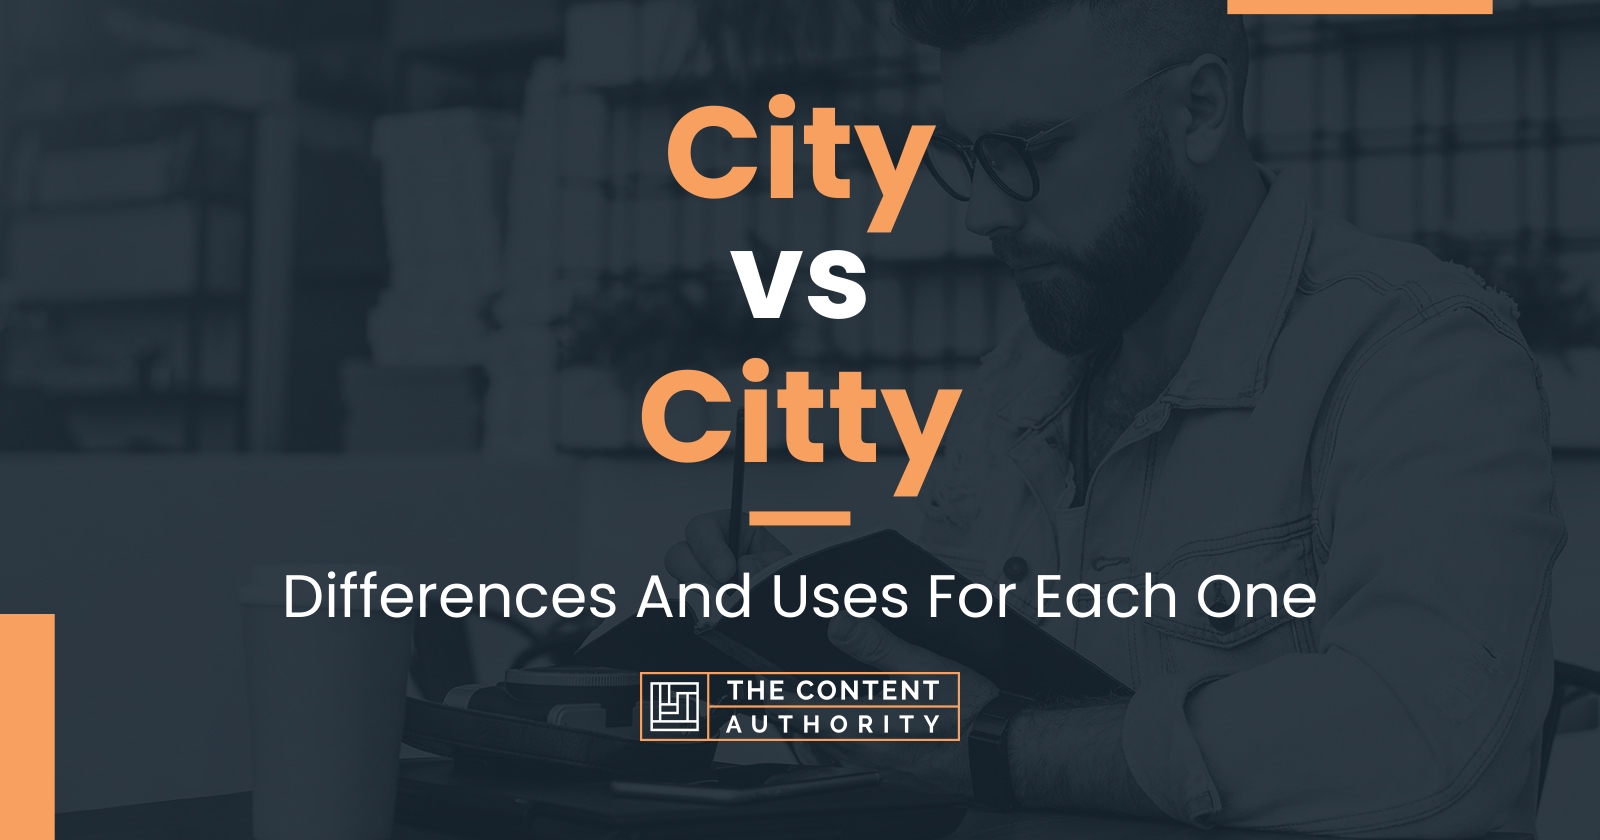 City vs Citty: Differences And Uses For Each One